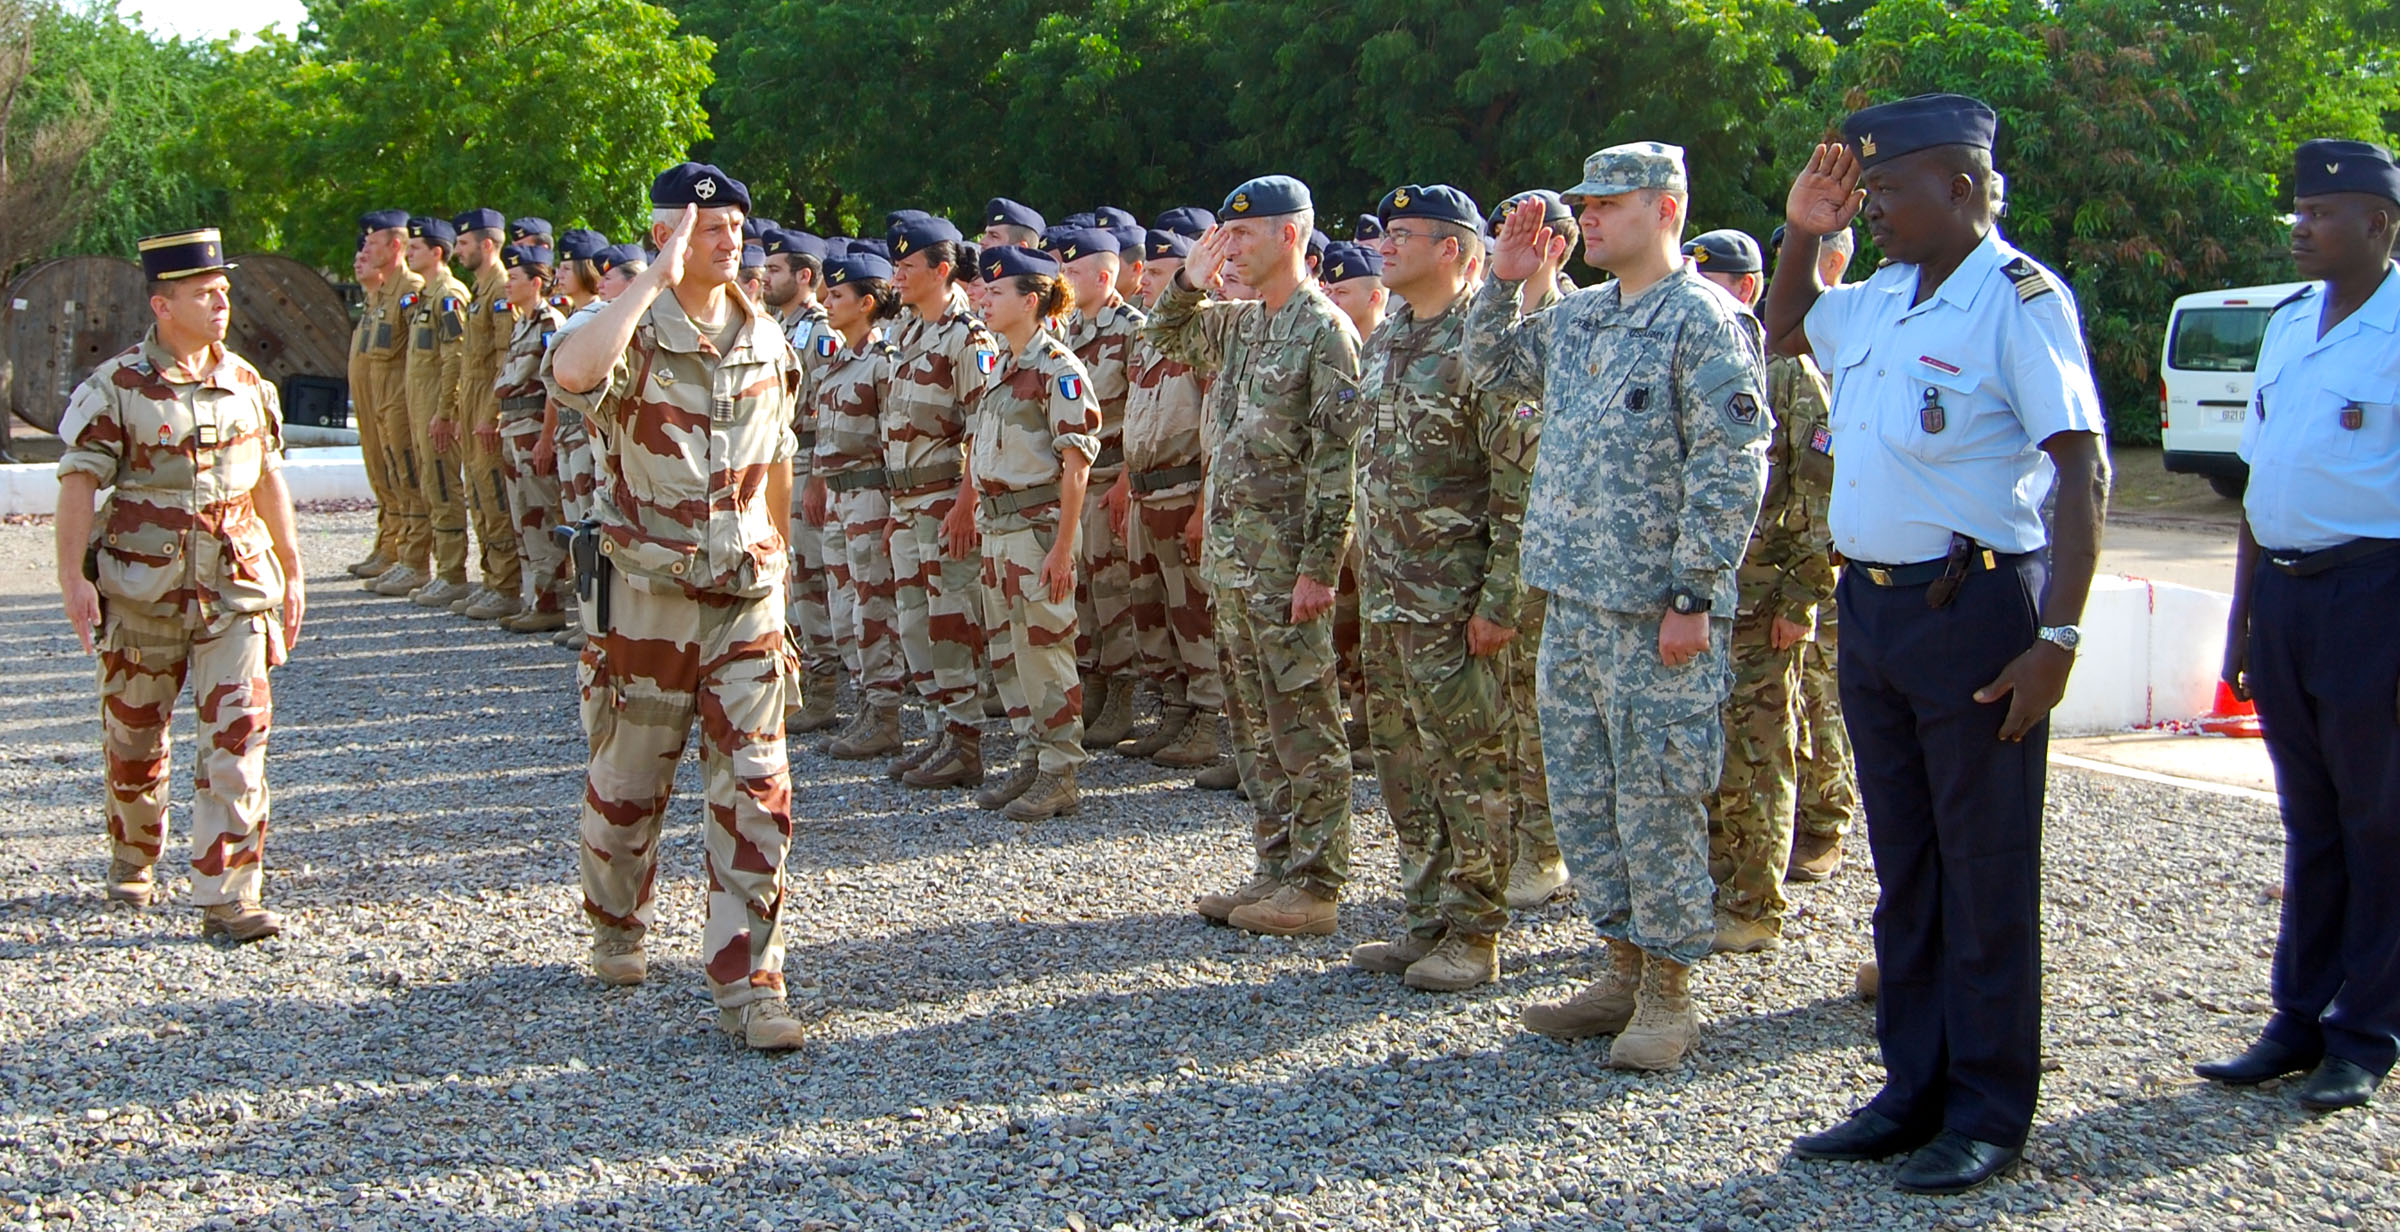 French troops Image U.S. Army Southern European Task Force Africa Flickr